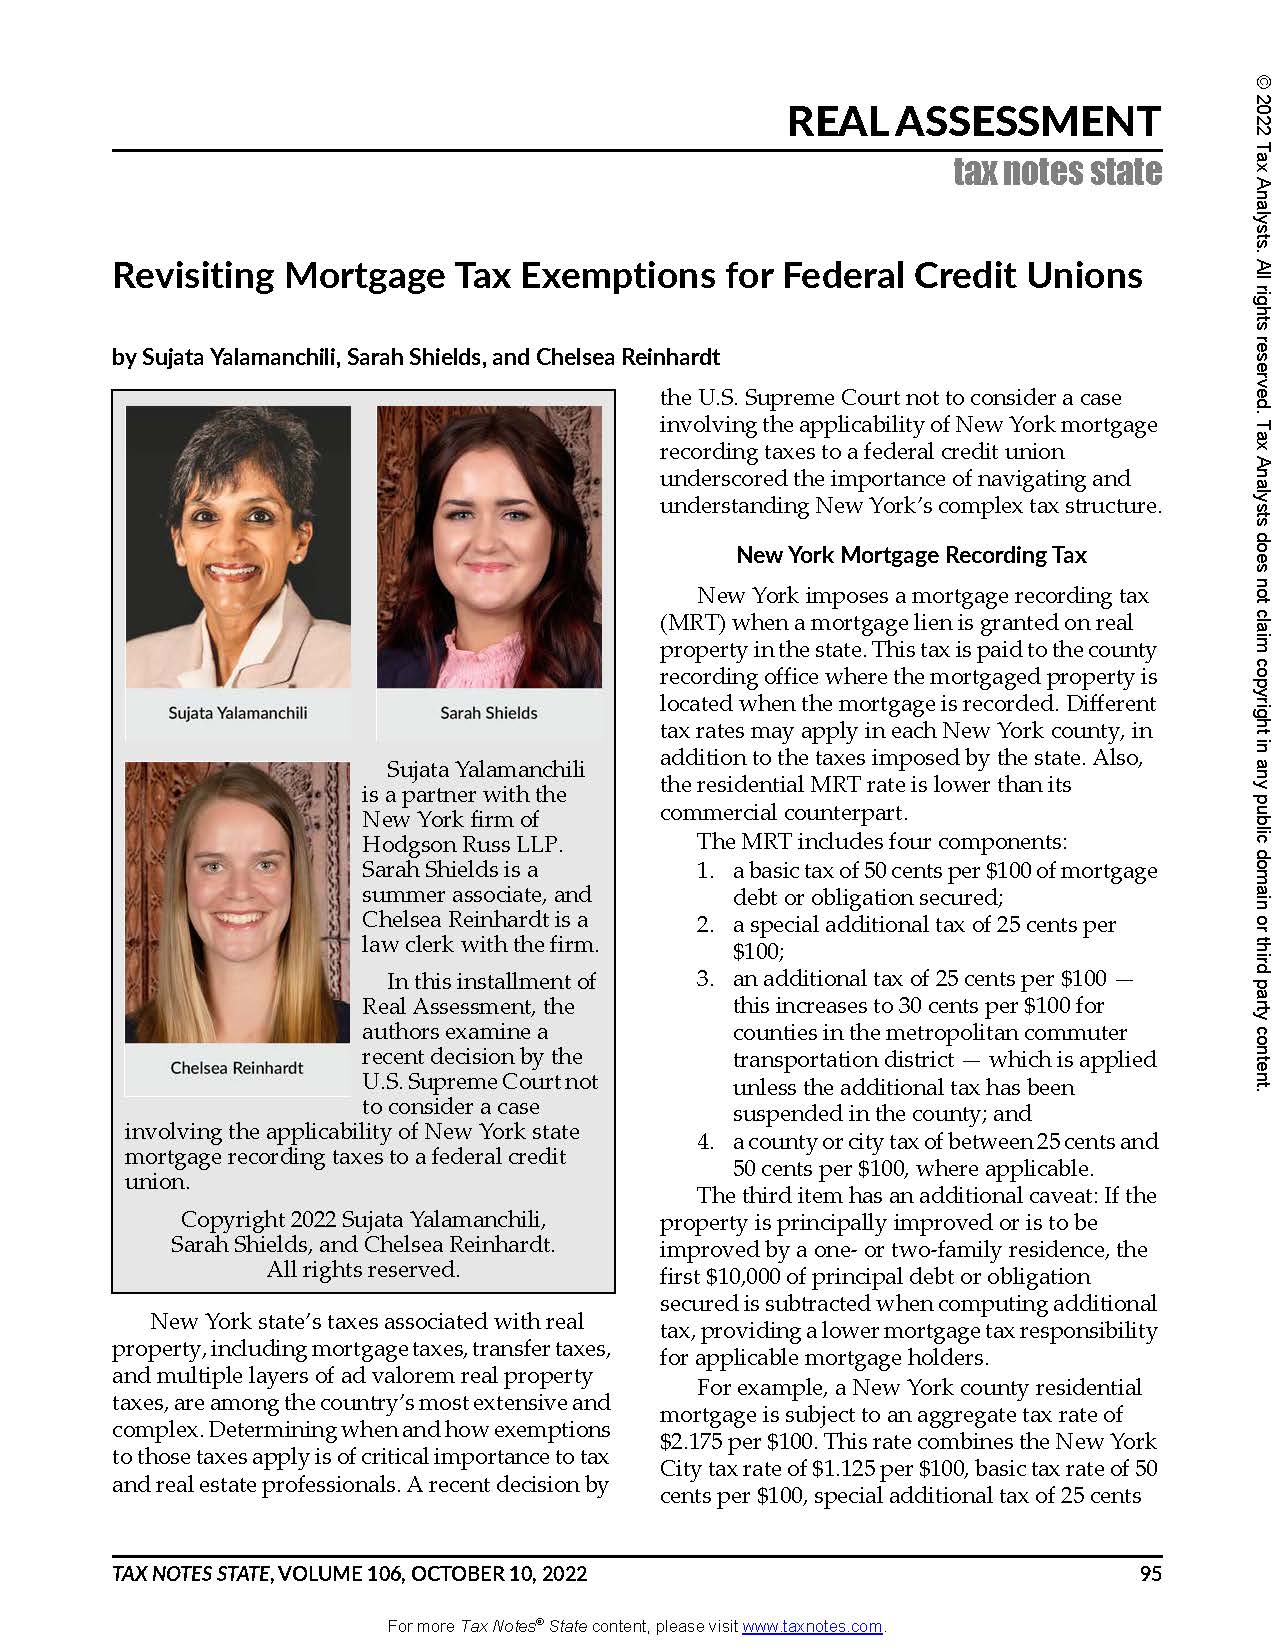 Page of a tax law journal